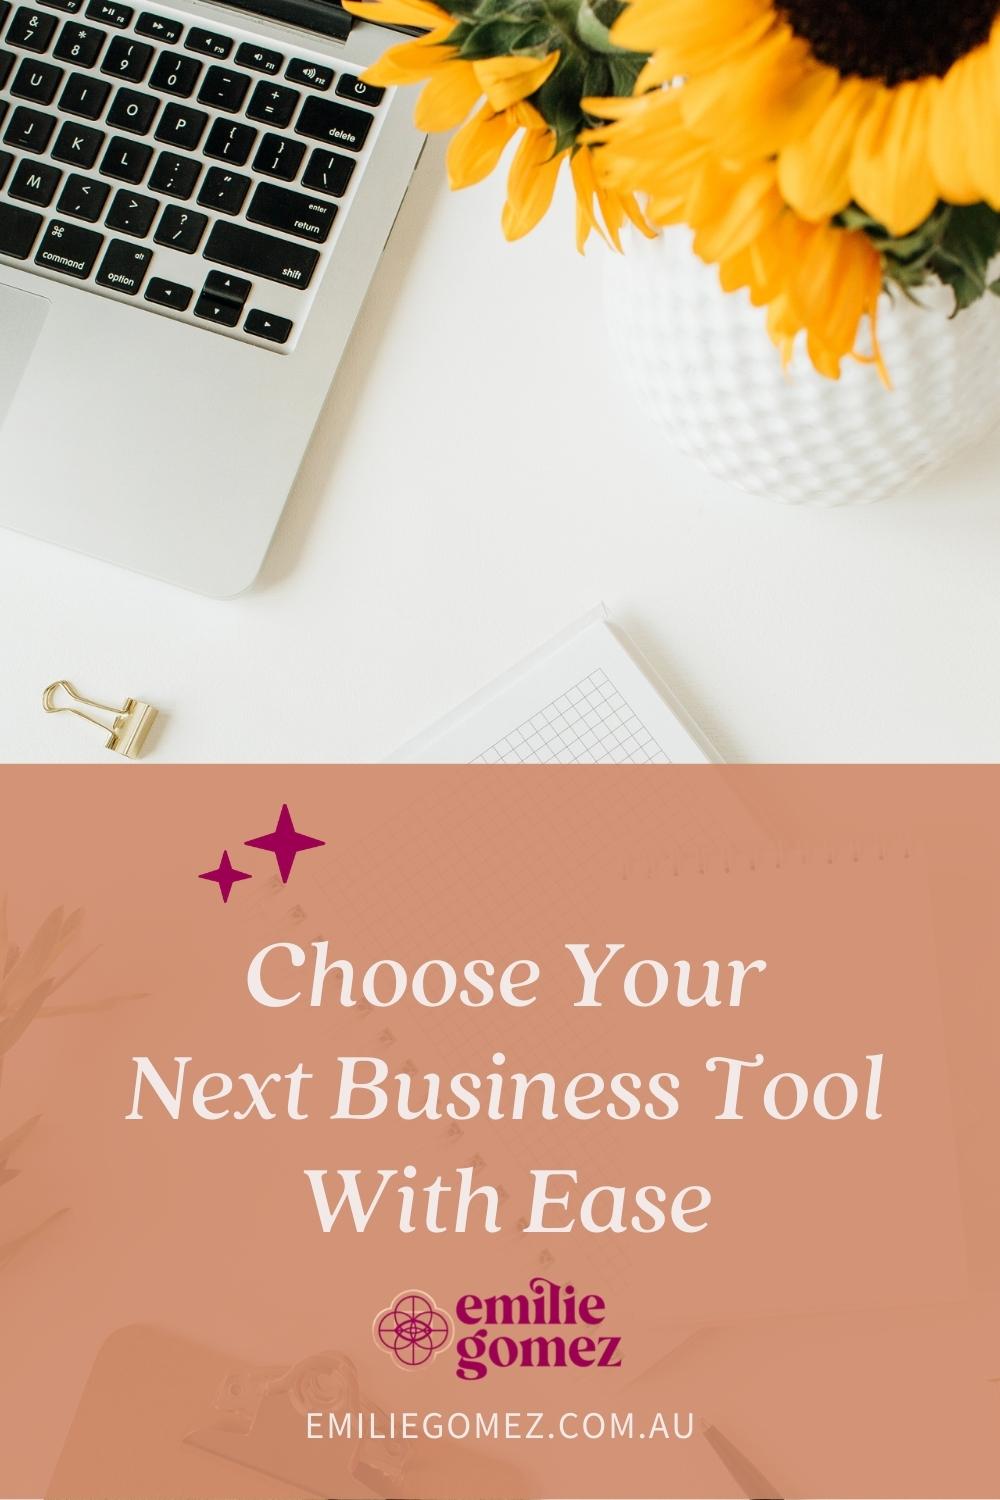 There are so many business tools out there nowadays that it can be hard to decide which one to use in your own business. Should you just go with what everyone else seems to be using? Choosing a business tool based on other people’s recommendations can be a BIG mistake! You need to take your own unique business into account and use the tools that fit with how you like to work. That’s why I’m sharing my process for easily choosing your next business tool to fit YOU and YOUR business.